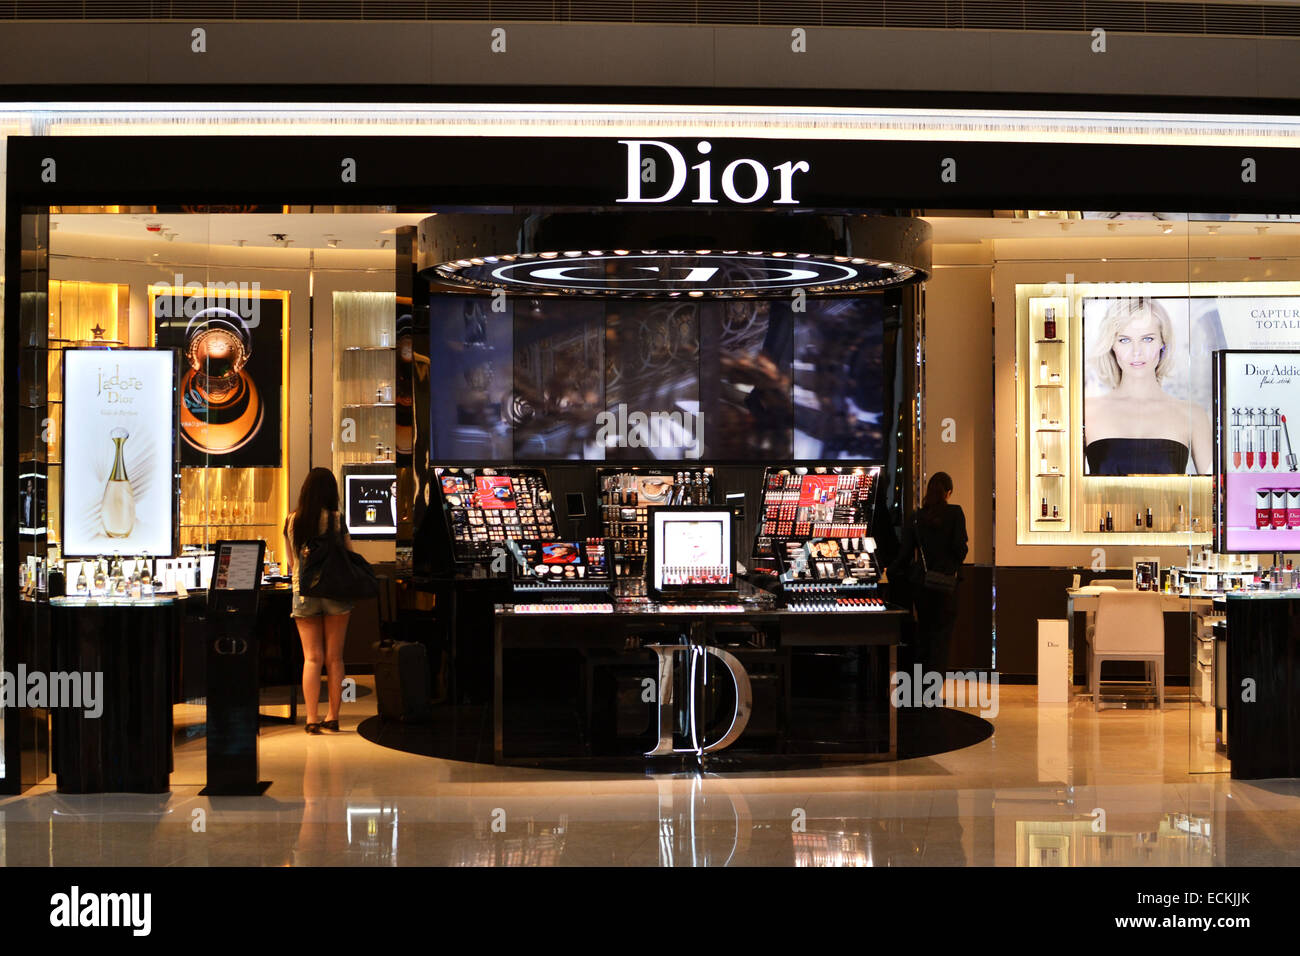 dior perfume offers